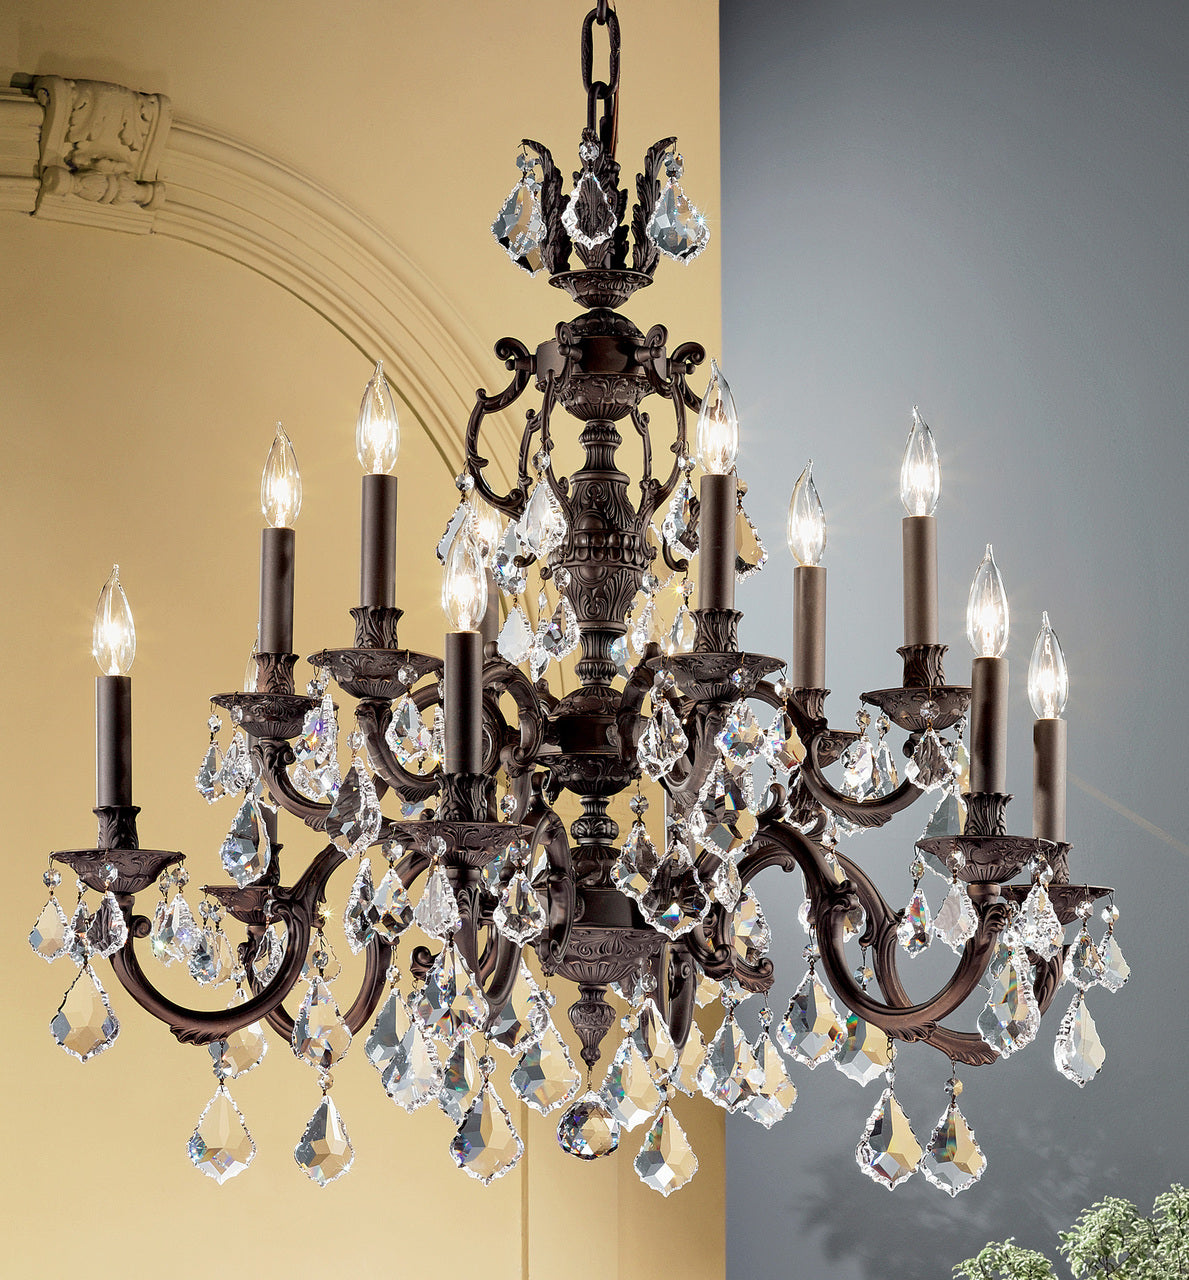 Classic Lighting 57377 FG CBK Chateau Crystal Chandelier in French Gold (Imported from Spain)